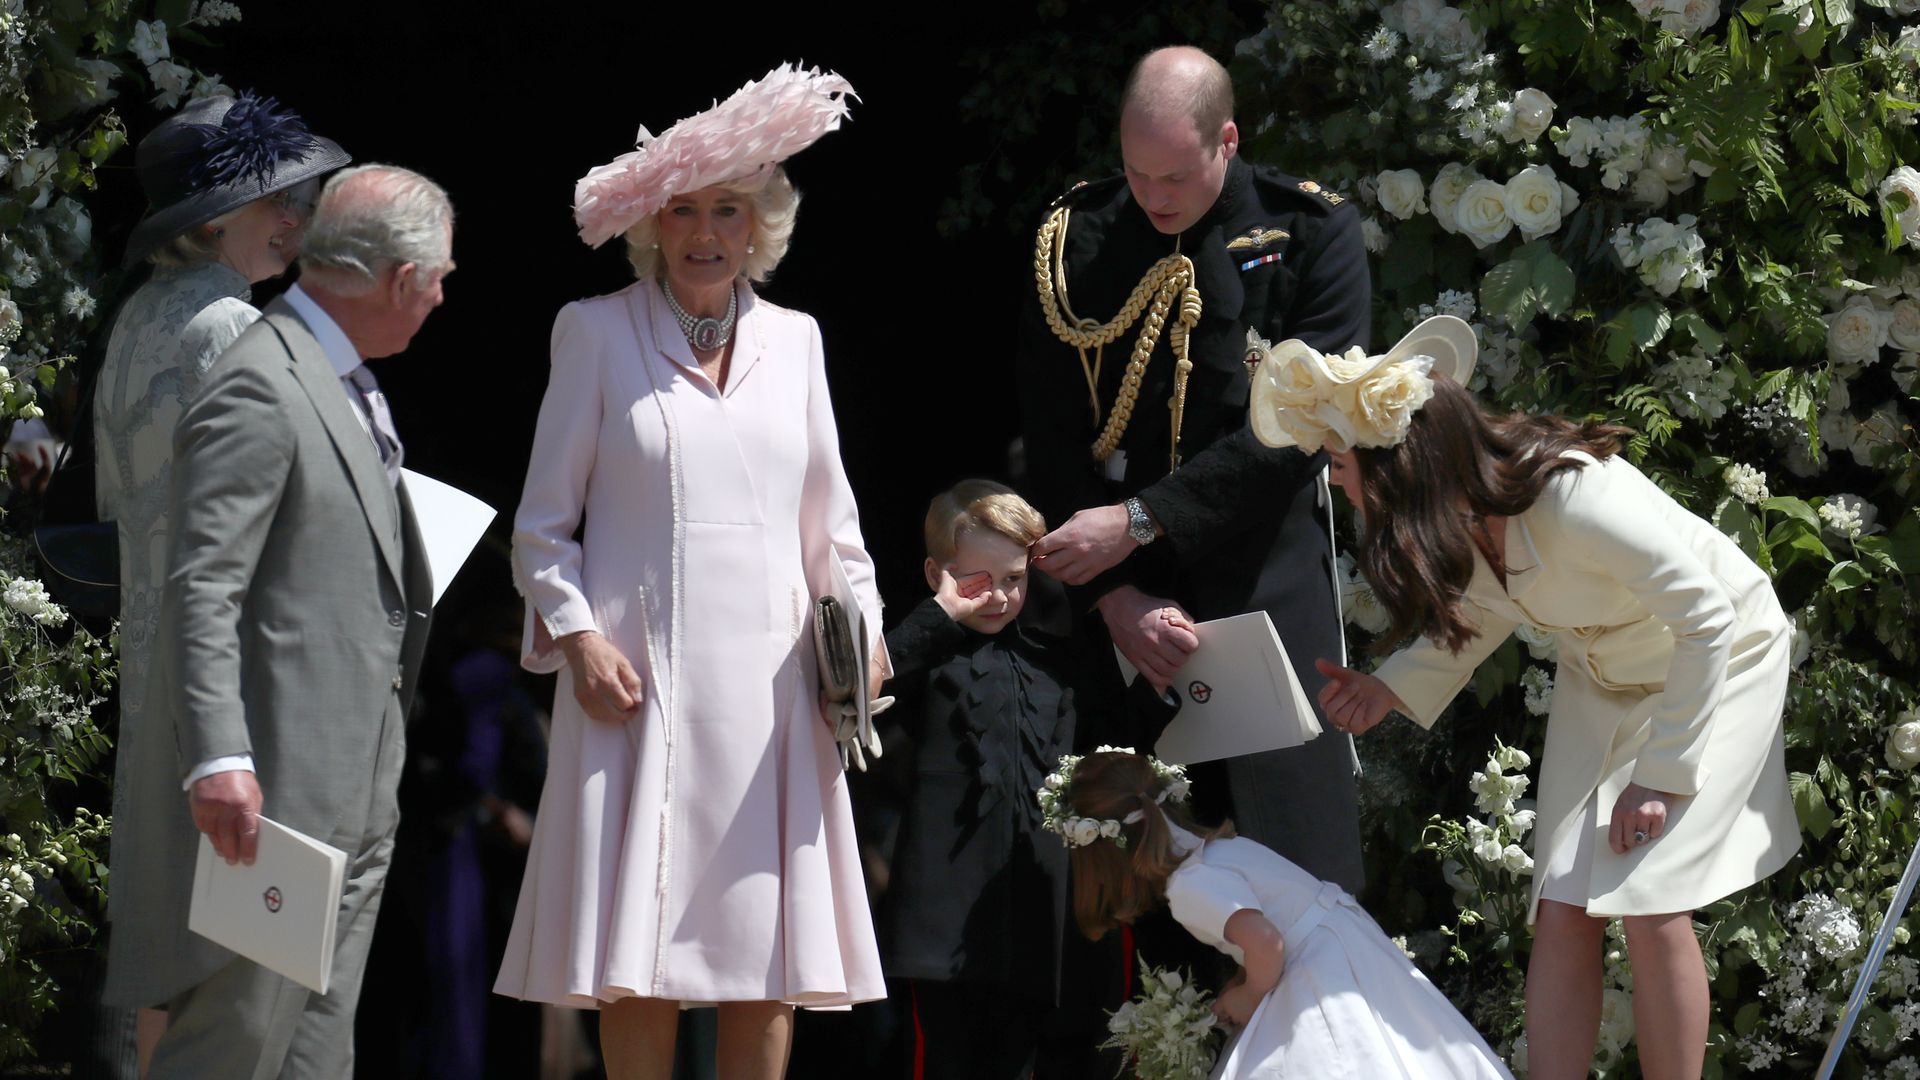 King Charles and Queen Camilla at a wedding as Prince George wipes his eye by Princess Charlotte